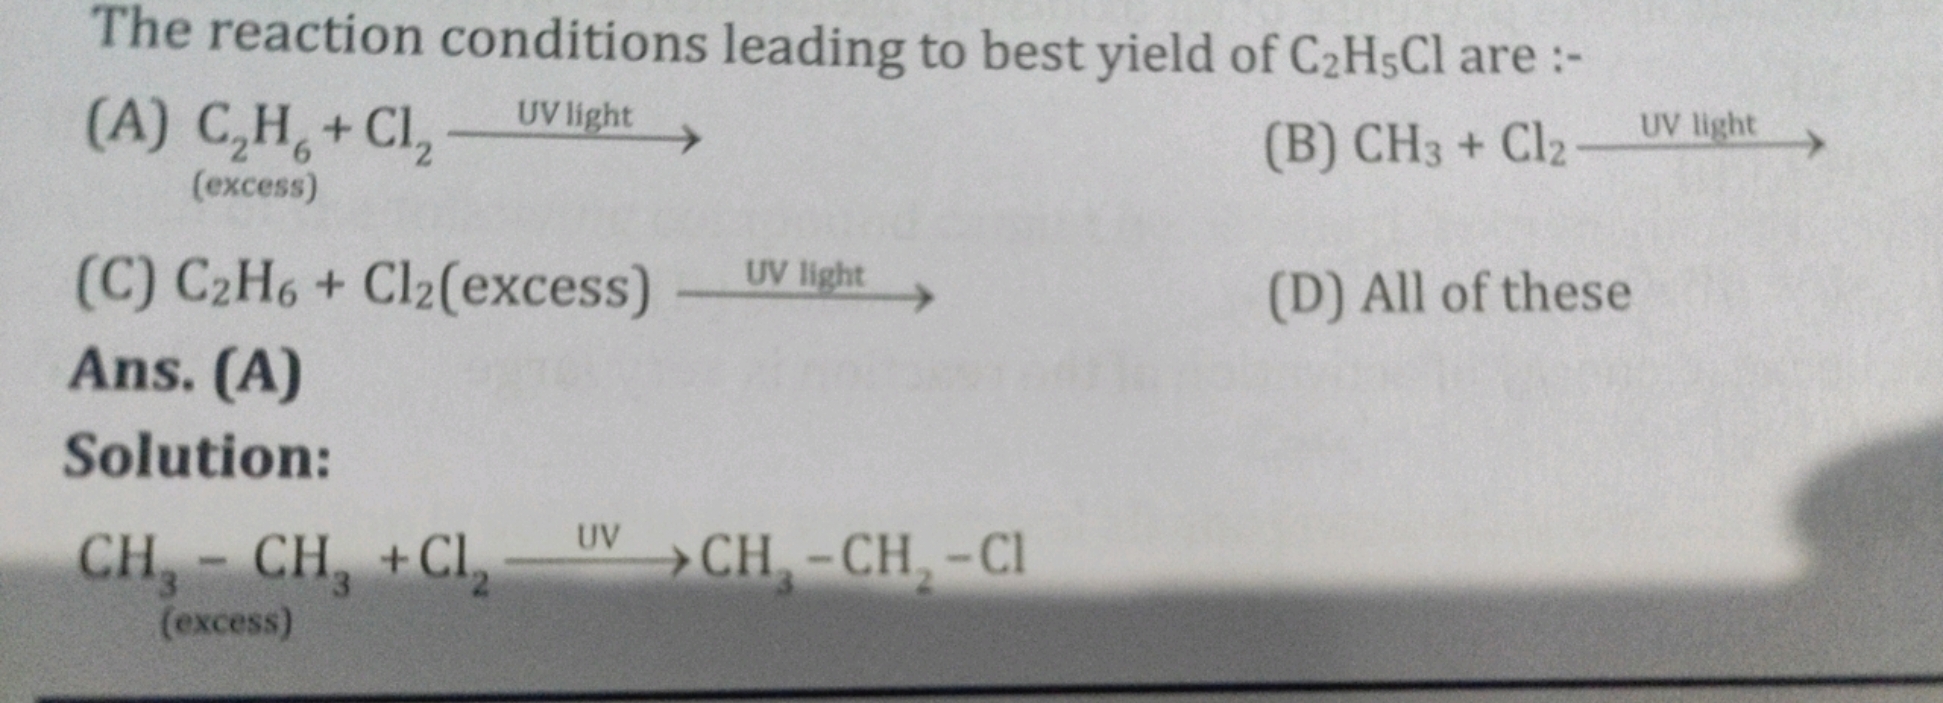 The reaction conditions leading to best yield of C2​H5​Cl are :-